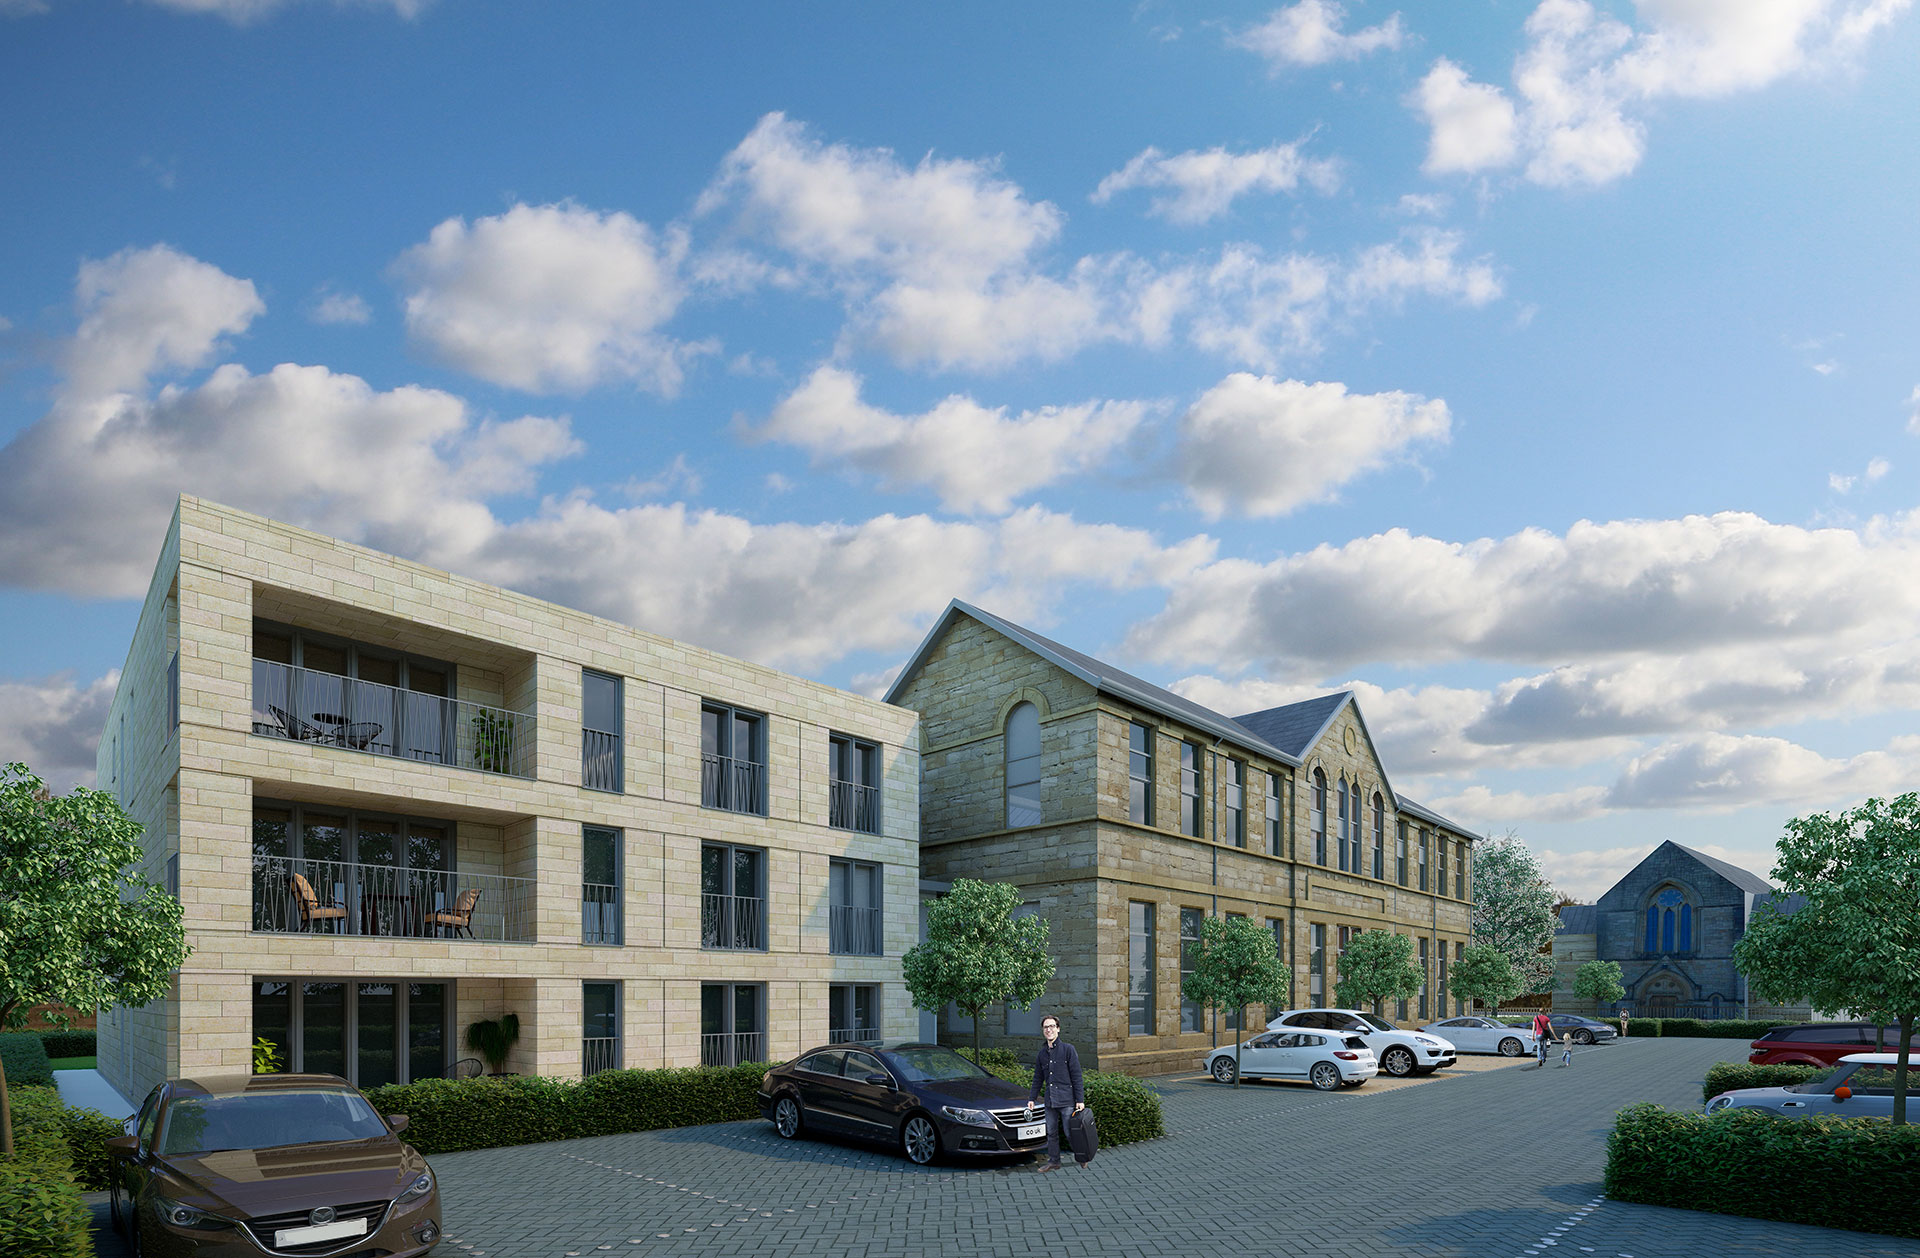 Hadrian Real Estate secures £1.8m loan for new residential development at Lenzie